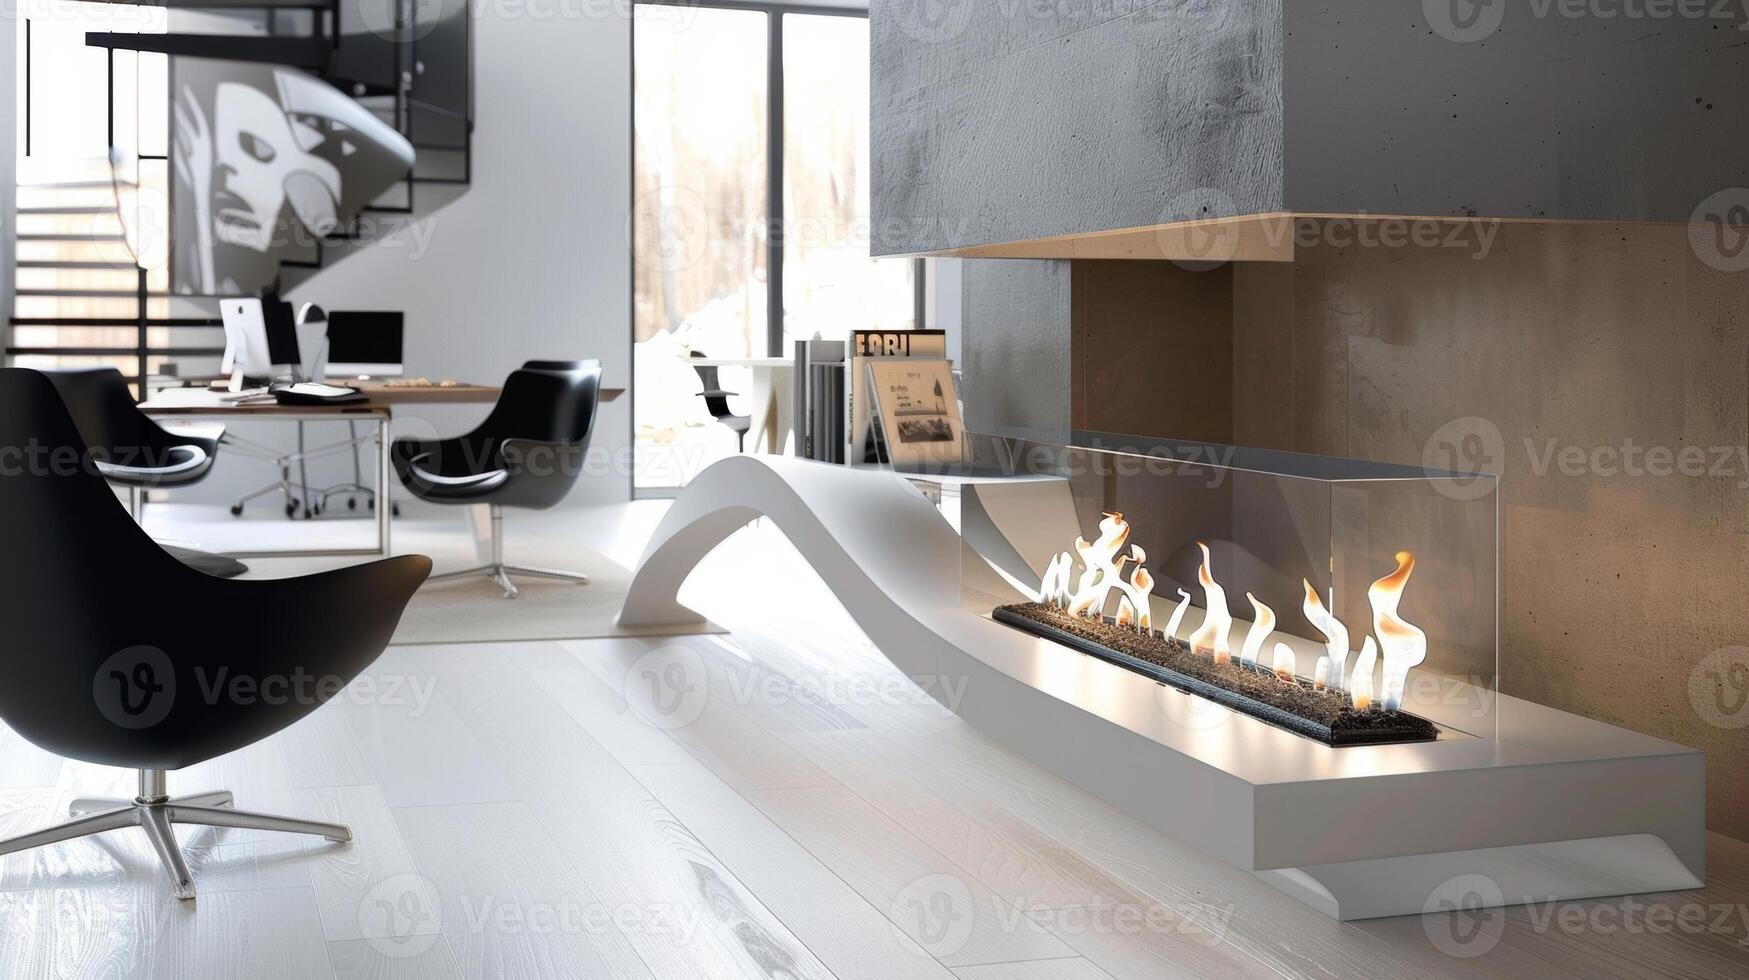 A chic modern office space with a bioethanol fireplace adding a touch of warmth and sophistication to the sleek decor. 2d flat cartoon photo